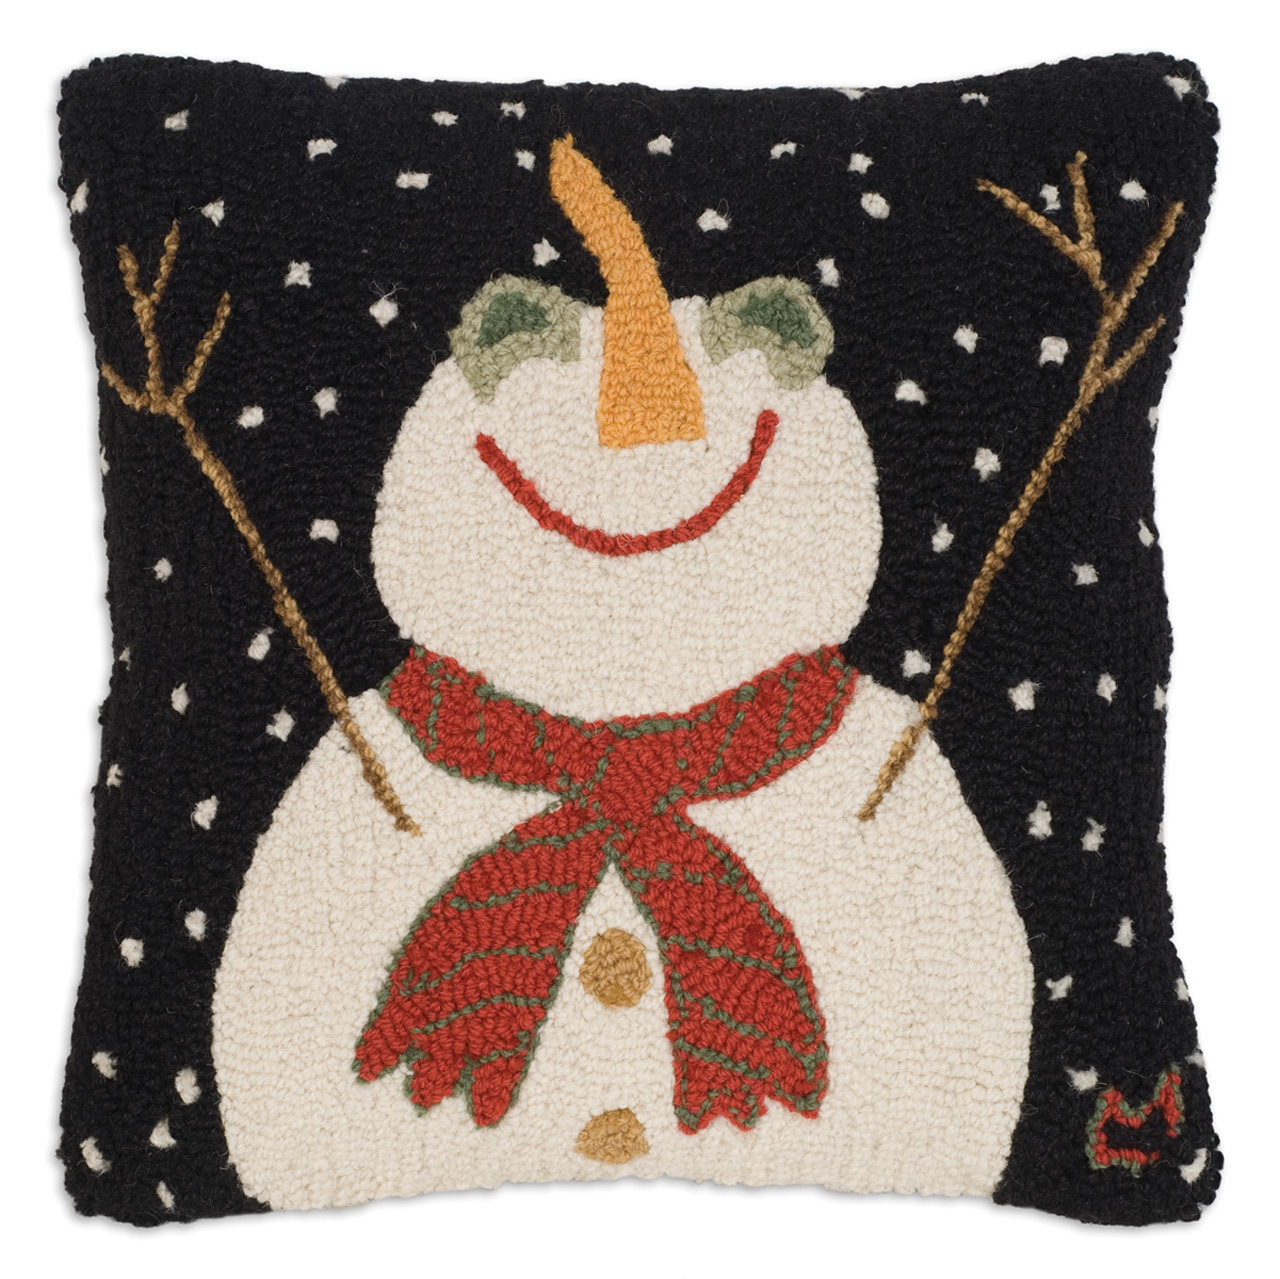 Let it Snow-Man! 18" Wool Hooked Pillow